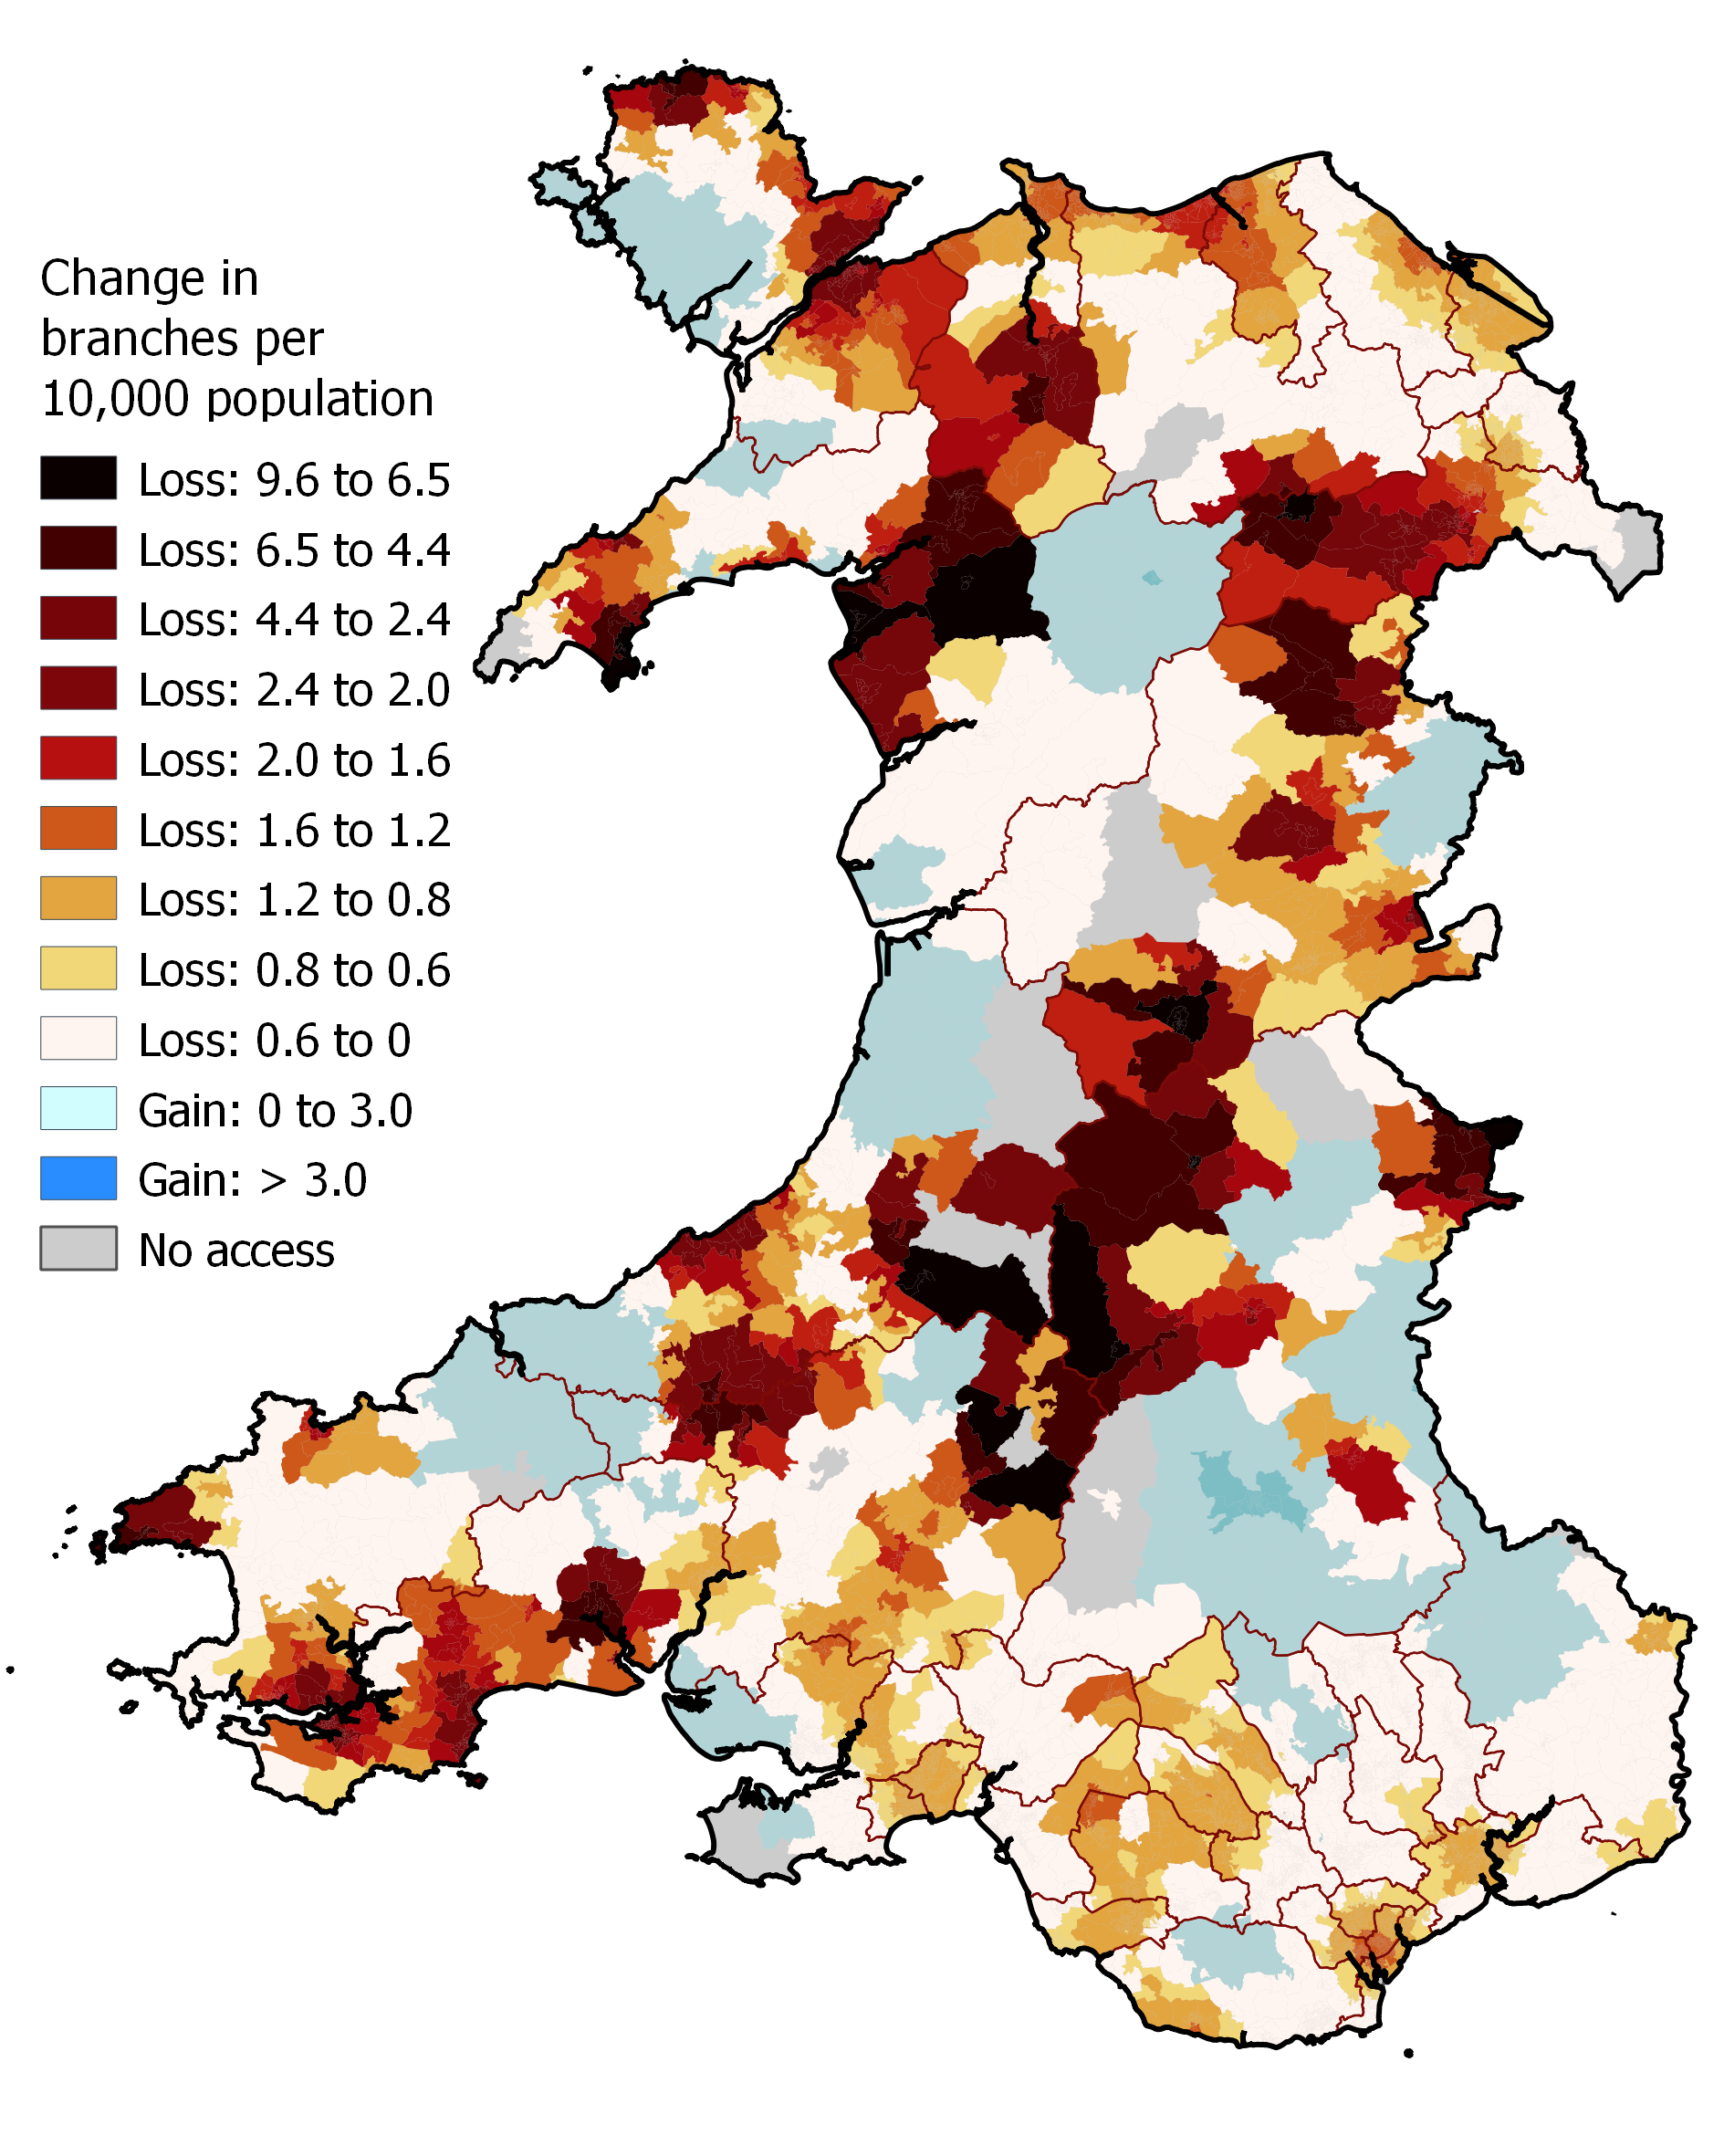 One map showing changes in accessibility to bank branches between 2008 and 2018 by using the enhanced two-step floating catchment area methodology. This can map accessibility to services at a more granular level than traditional methods.